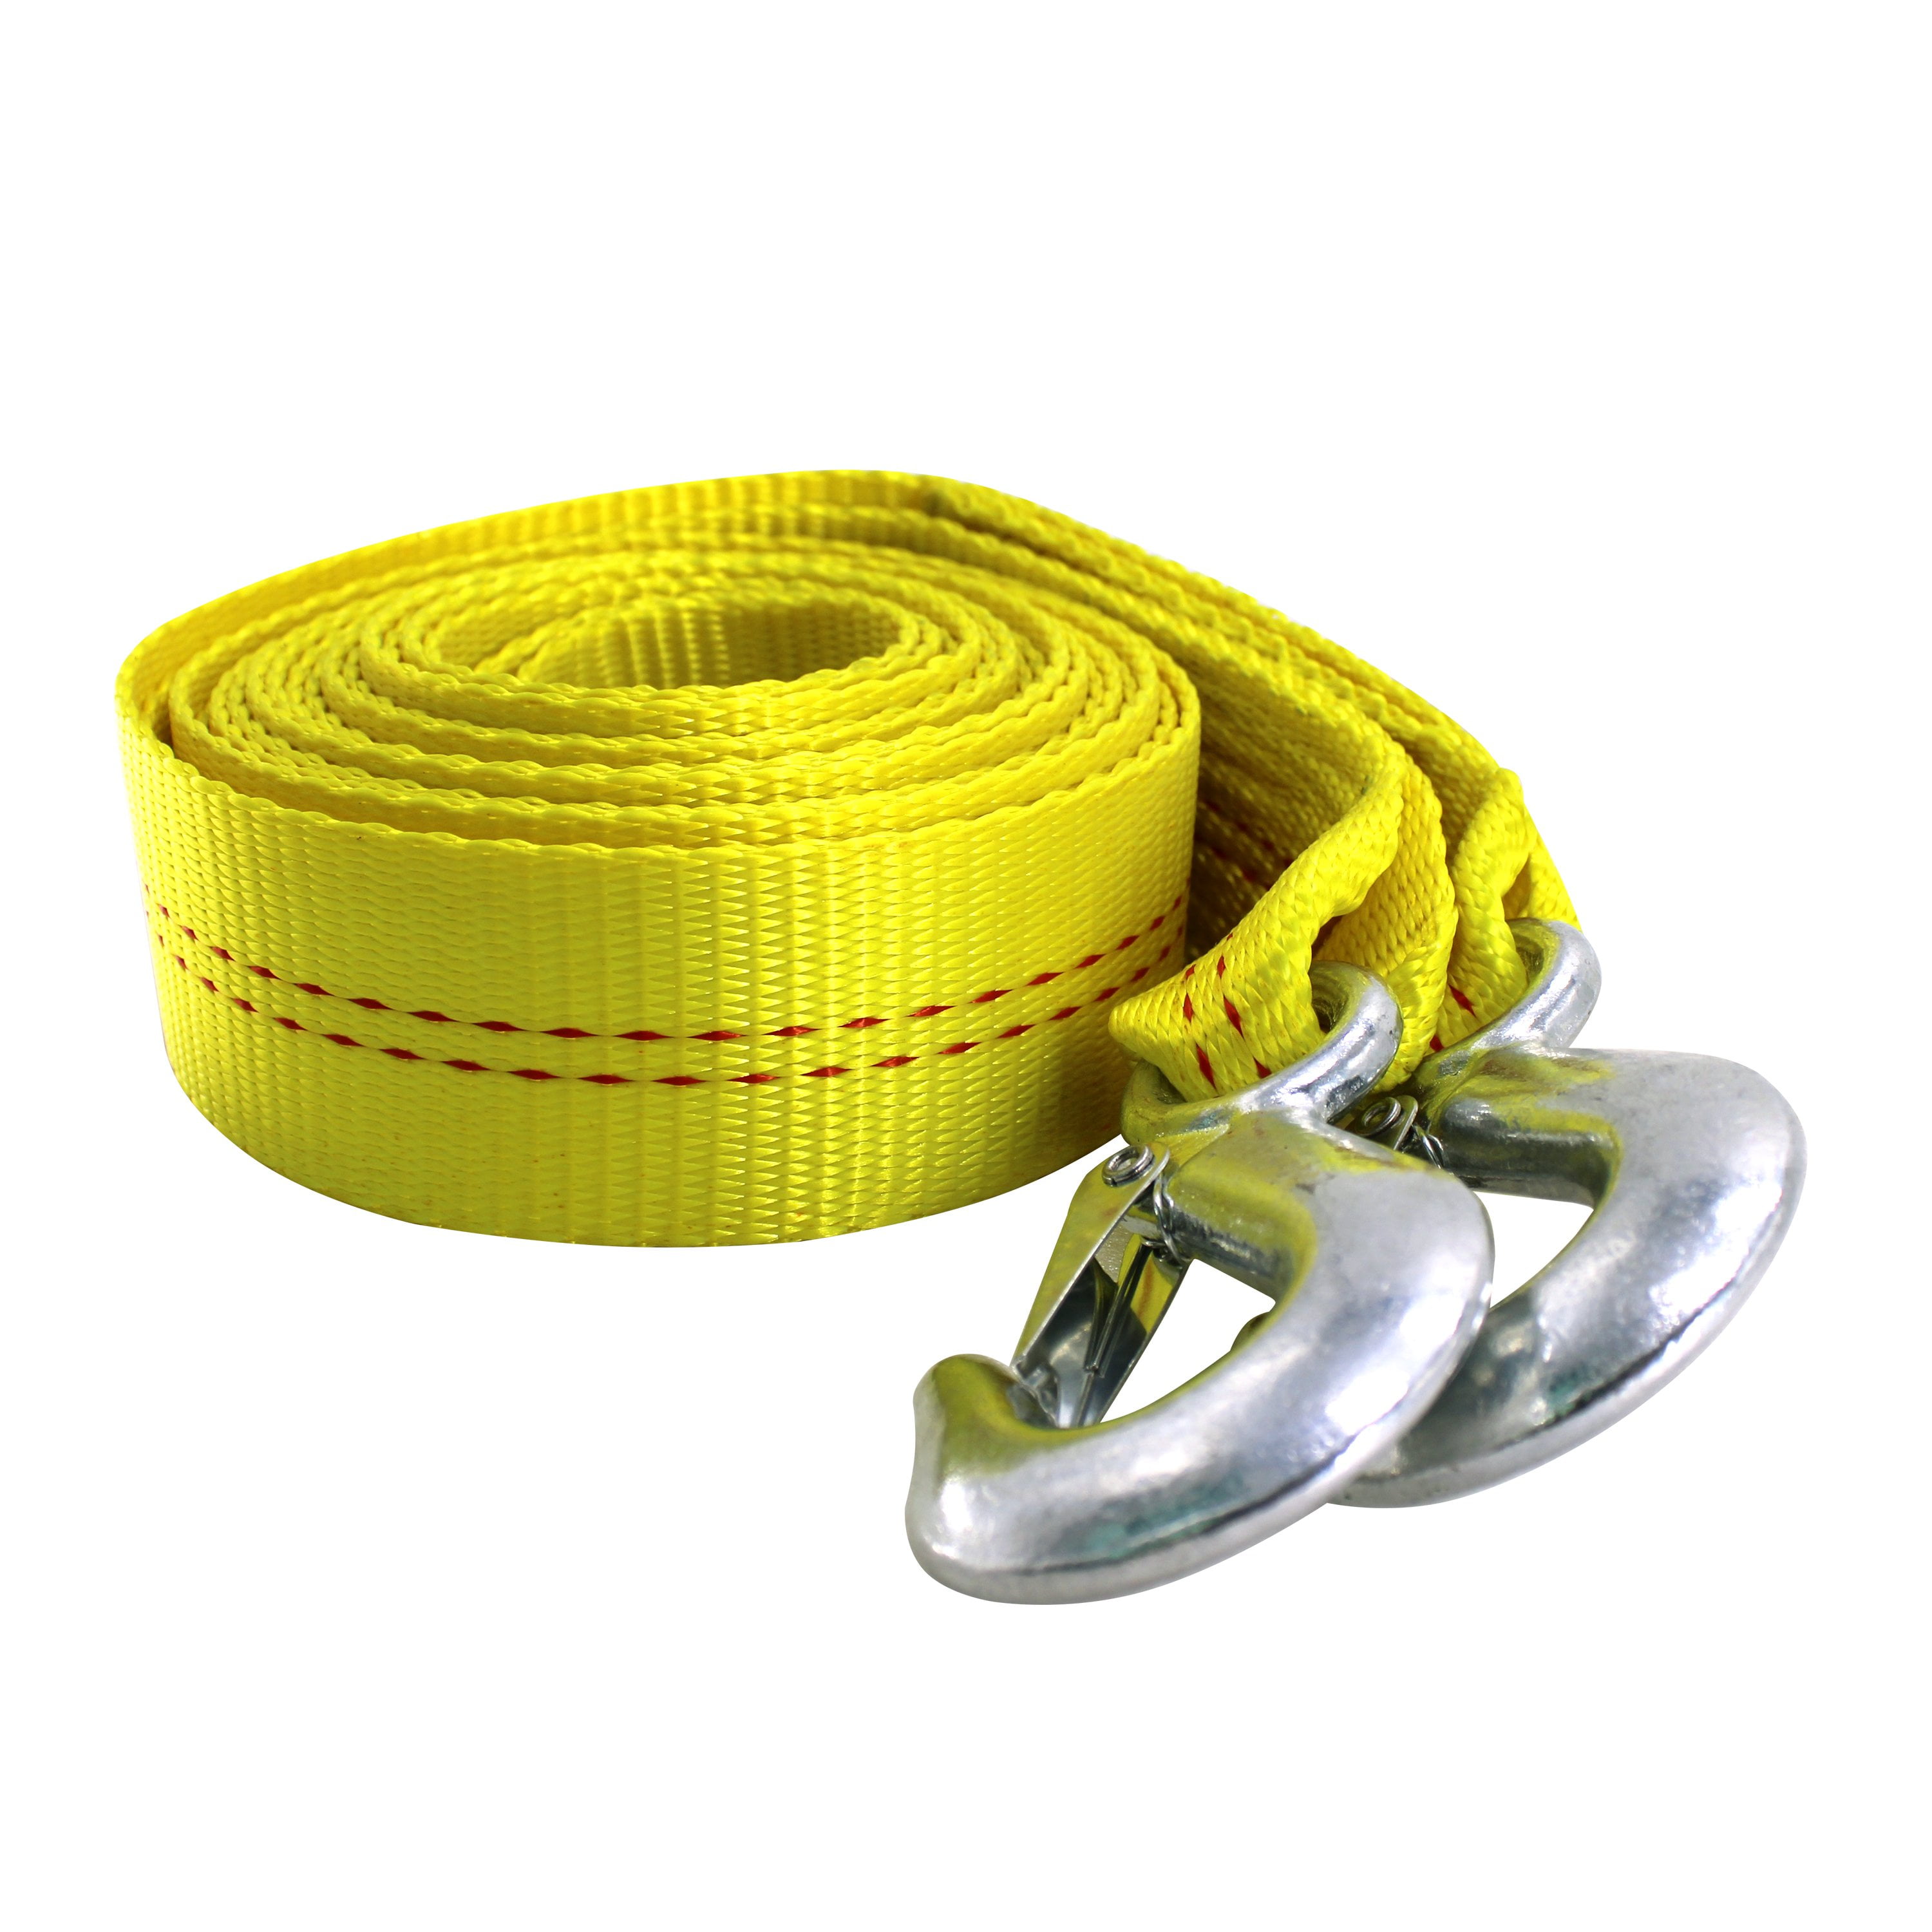 HFS (R) 4.5 Ton 2 inch x 20 ft. Polyester Tow Straps Ropes with 2